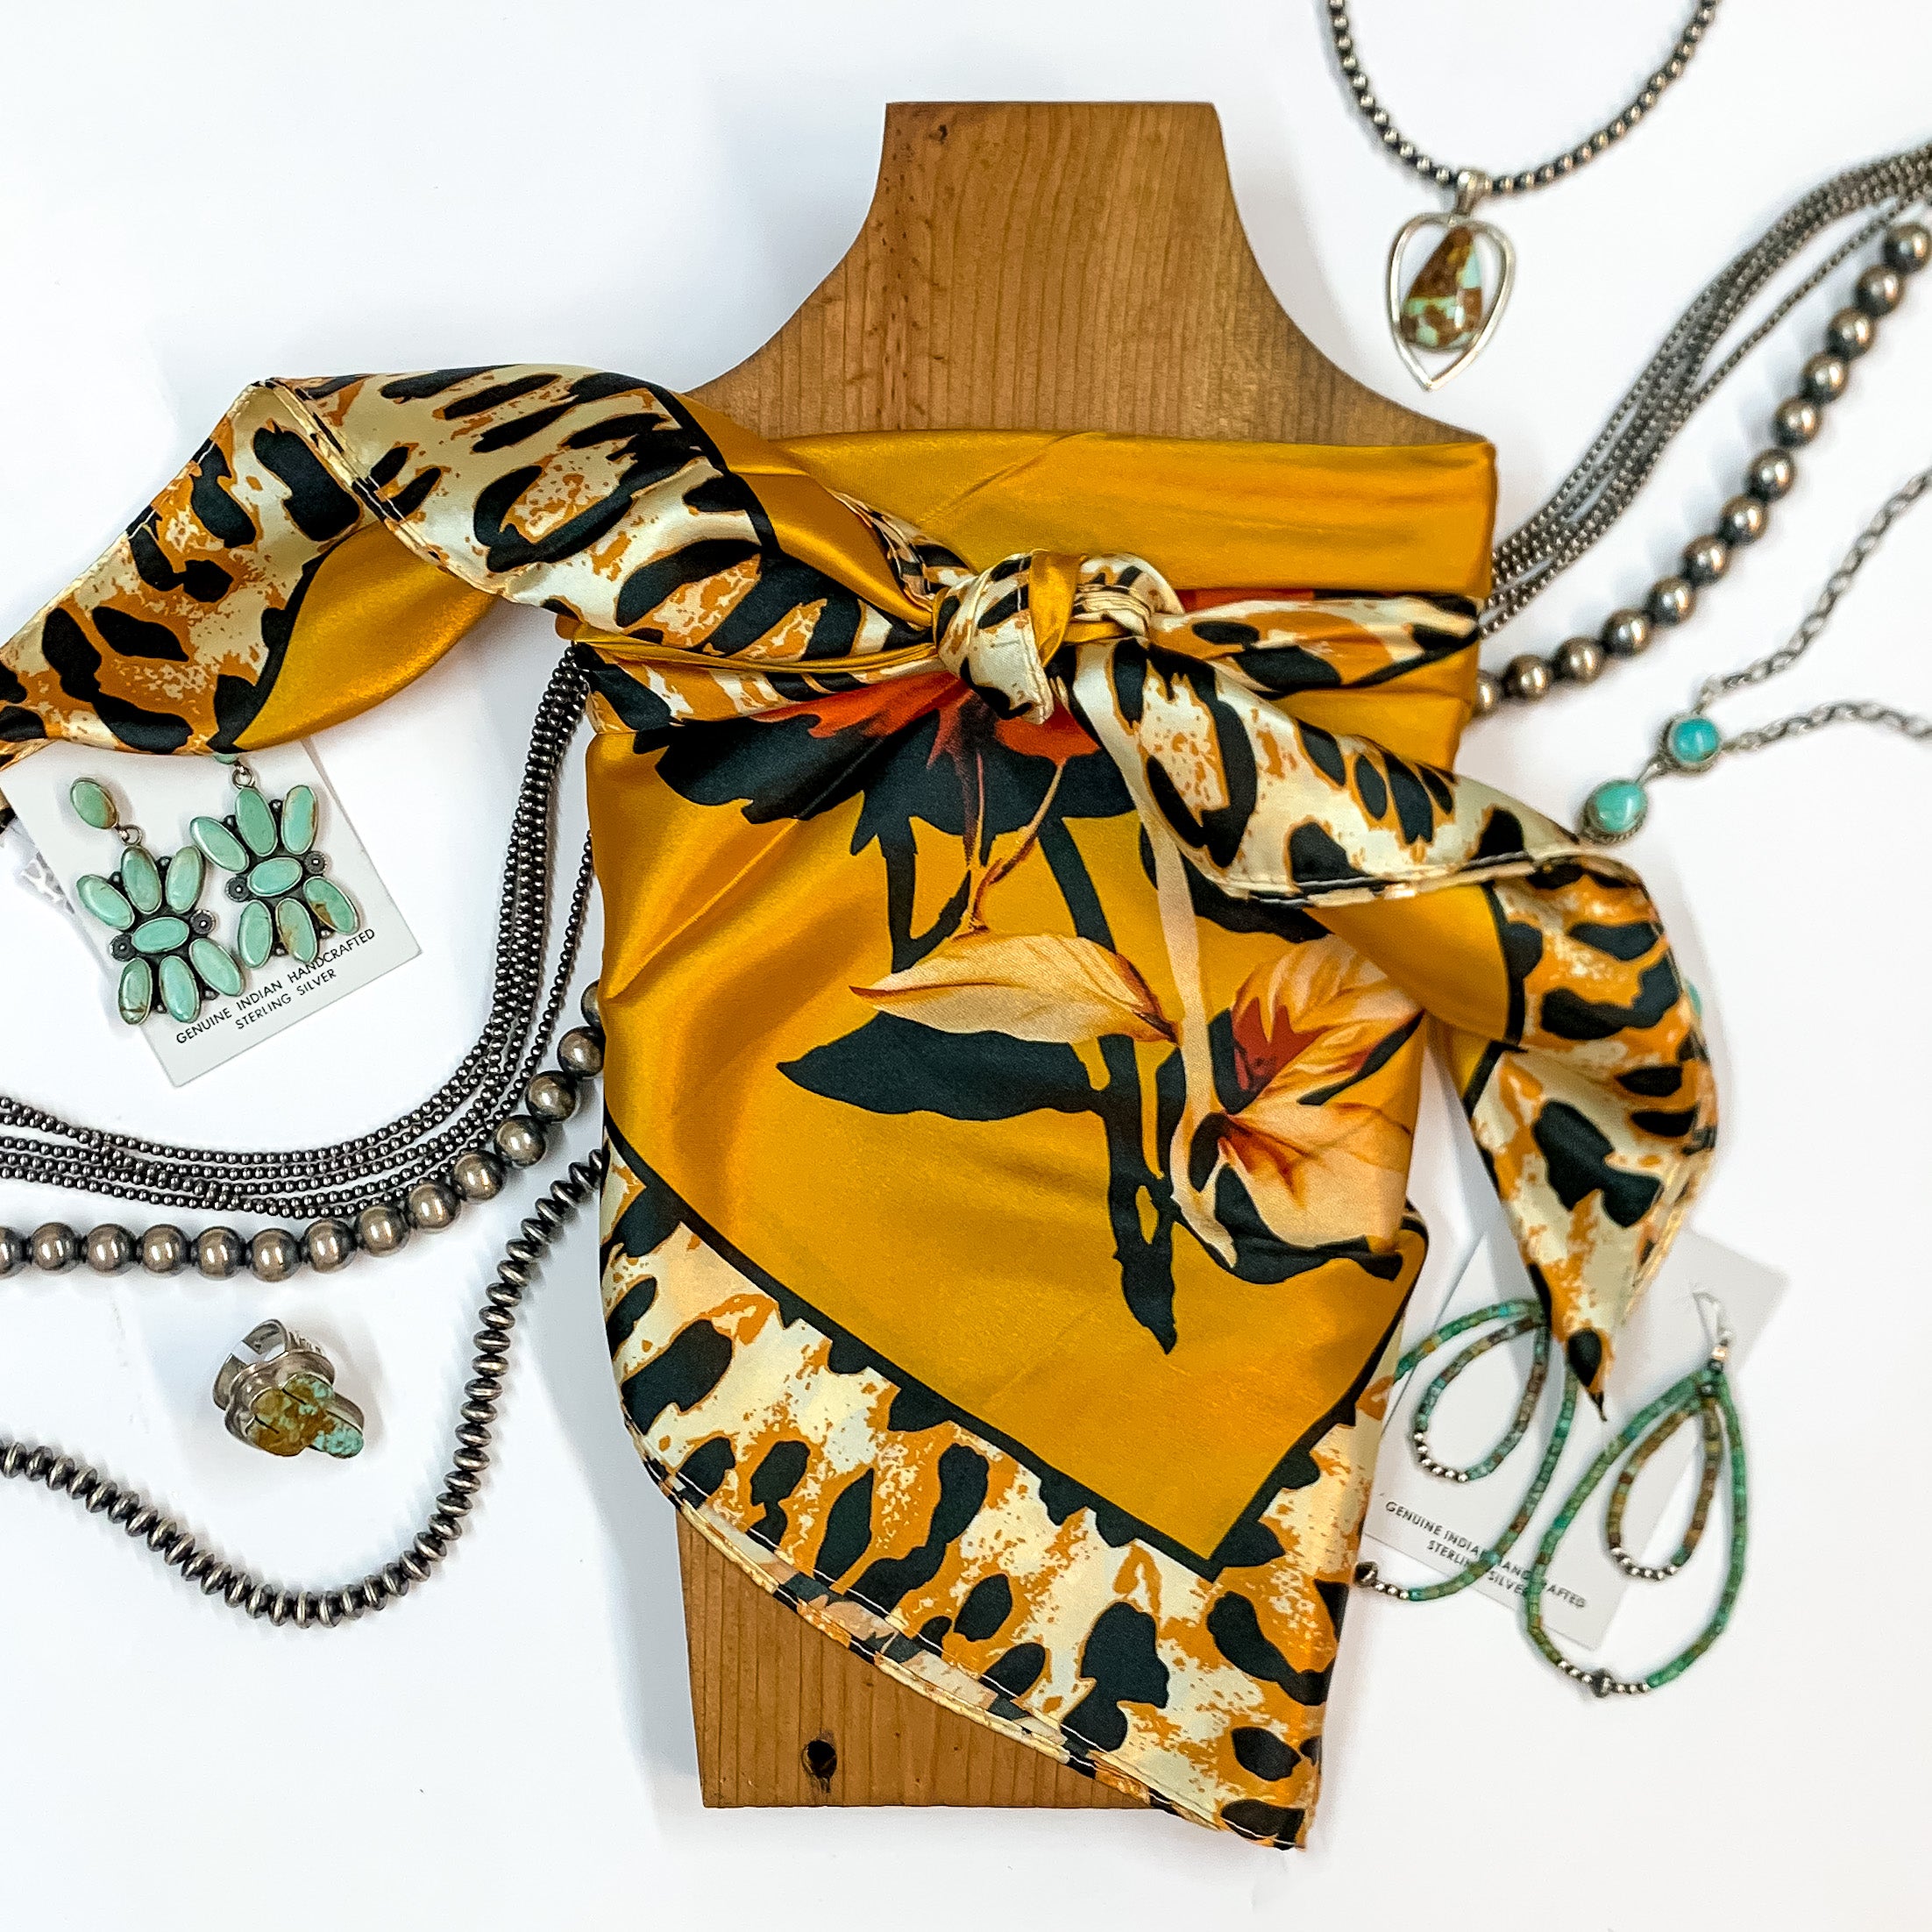 Patterned scarf in Fiesty Floral Mustard. Scarf is tied around a wooden piece. The scarf and piece of wood is pictured on a white background with Navajo jewelry spread out around it.